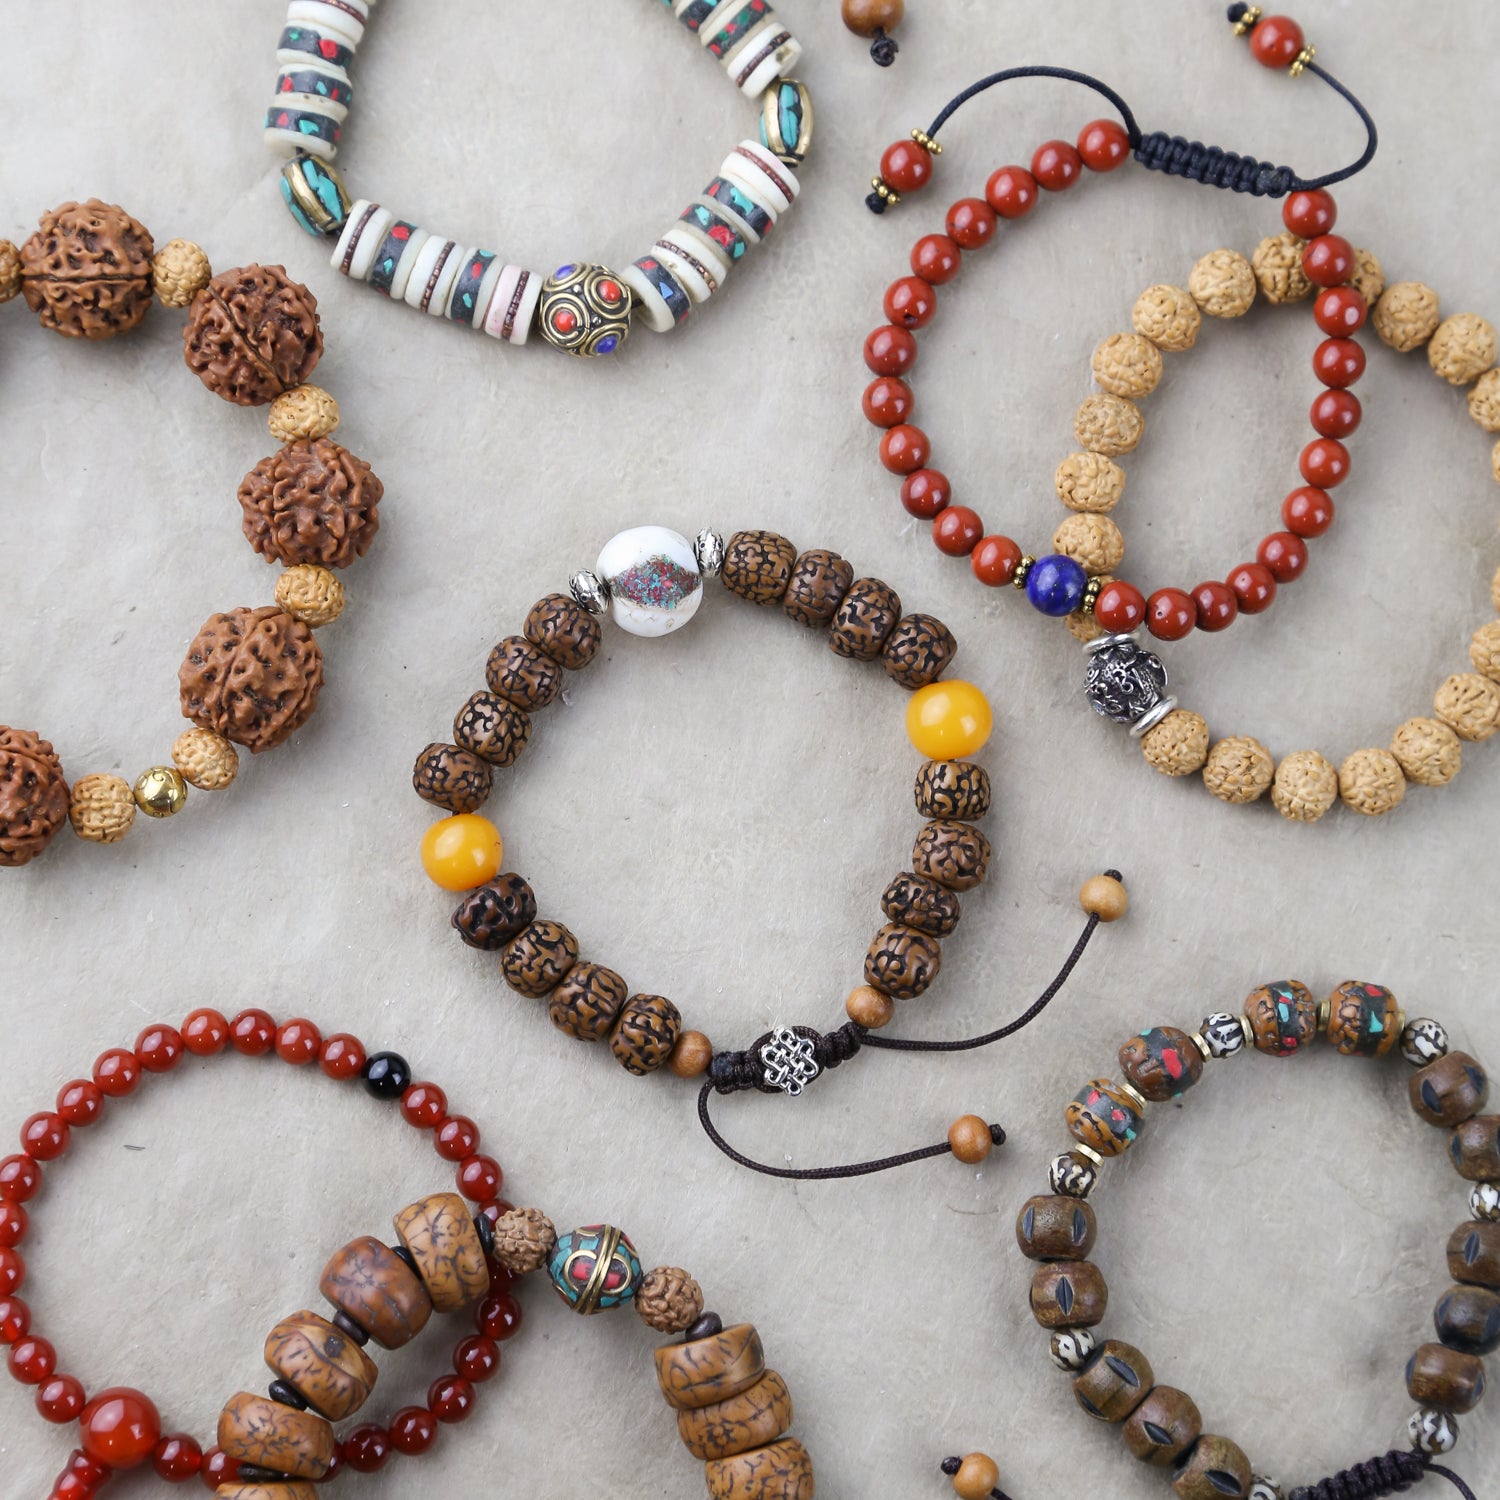 How to adjust your mala beads